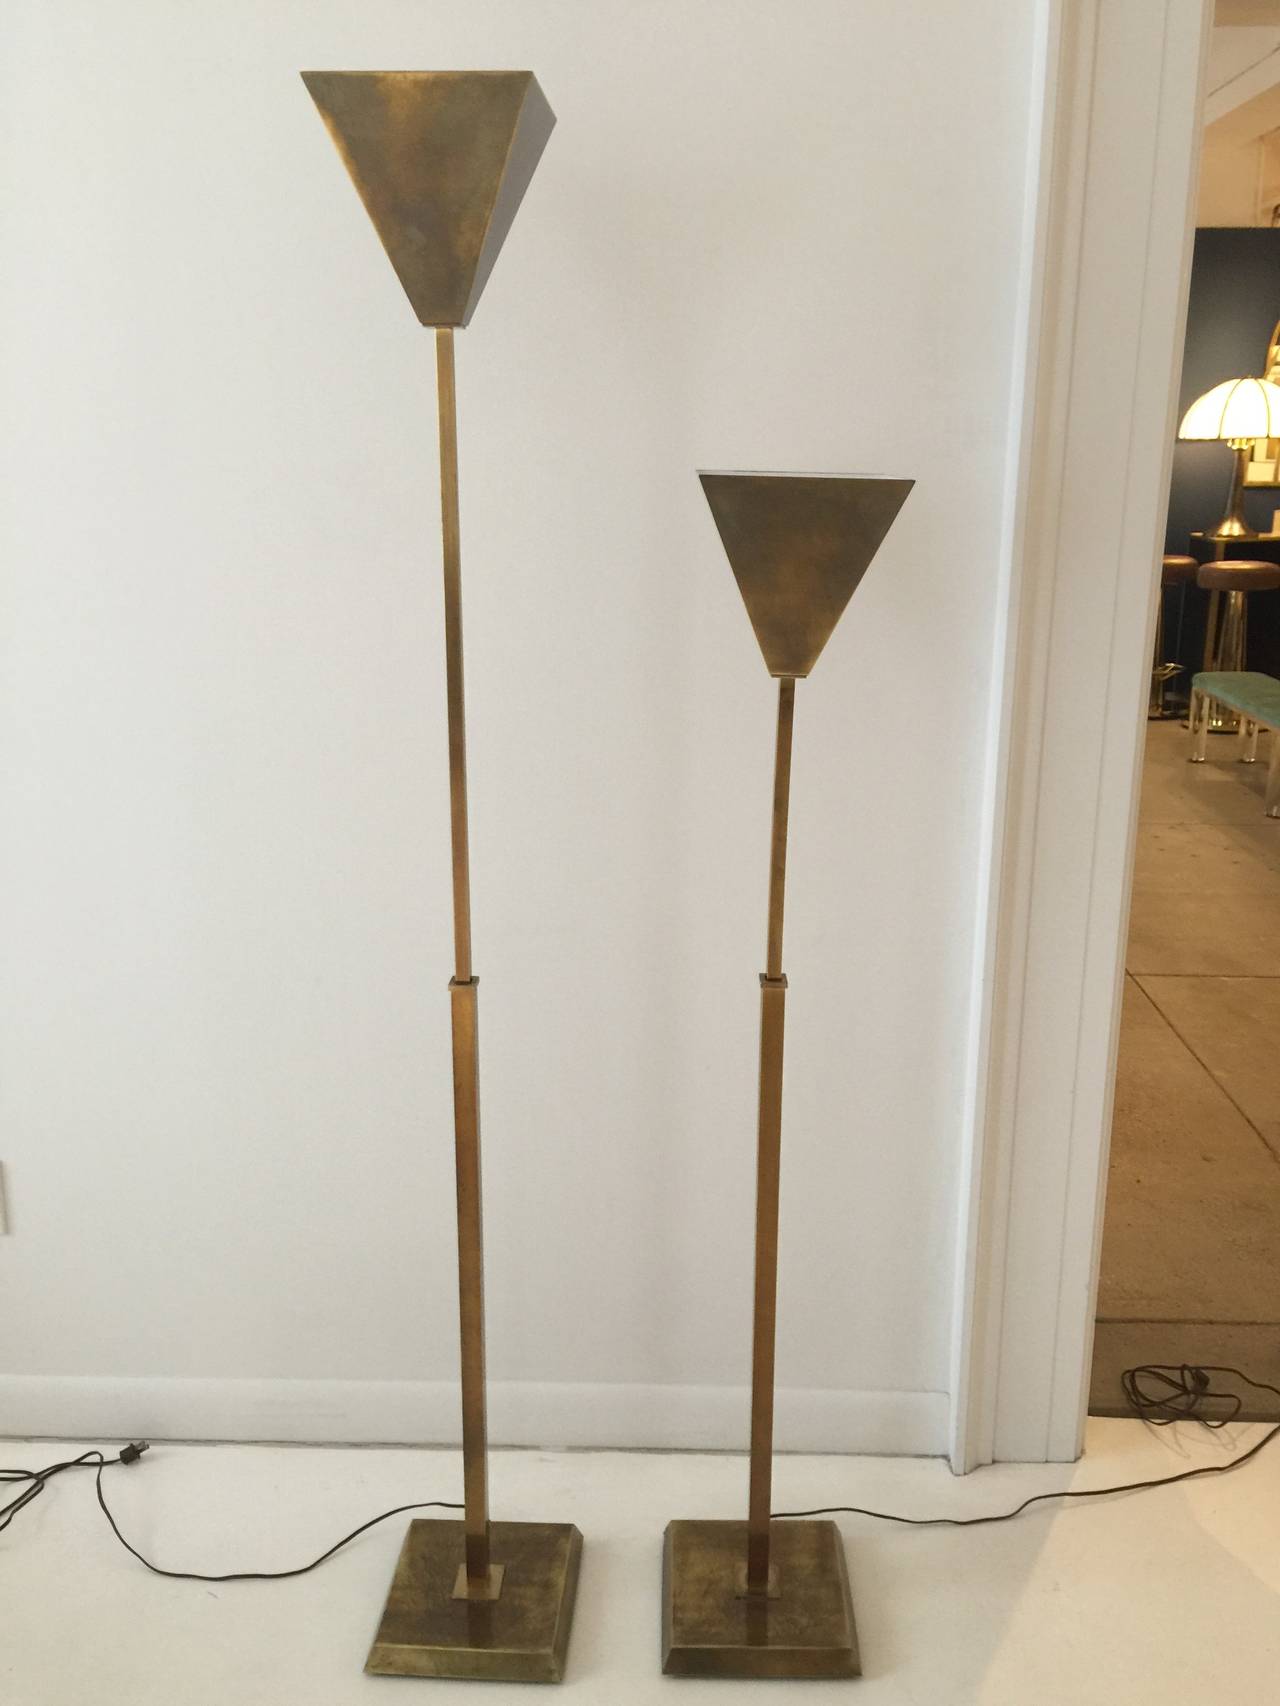 A wonderful original pair of floor lamps with an inverted pyramidal diffuser raised on a chamfered square brass base. These lamps are FULLY adjustable (see detail image).  An integral three-way switch controls the light levels through tapping the